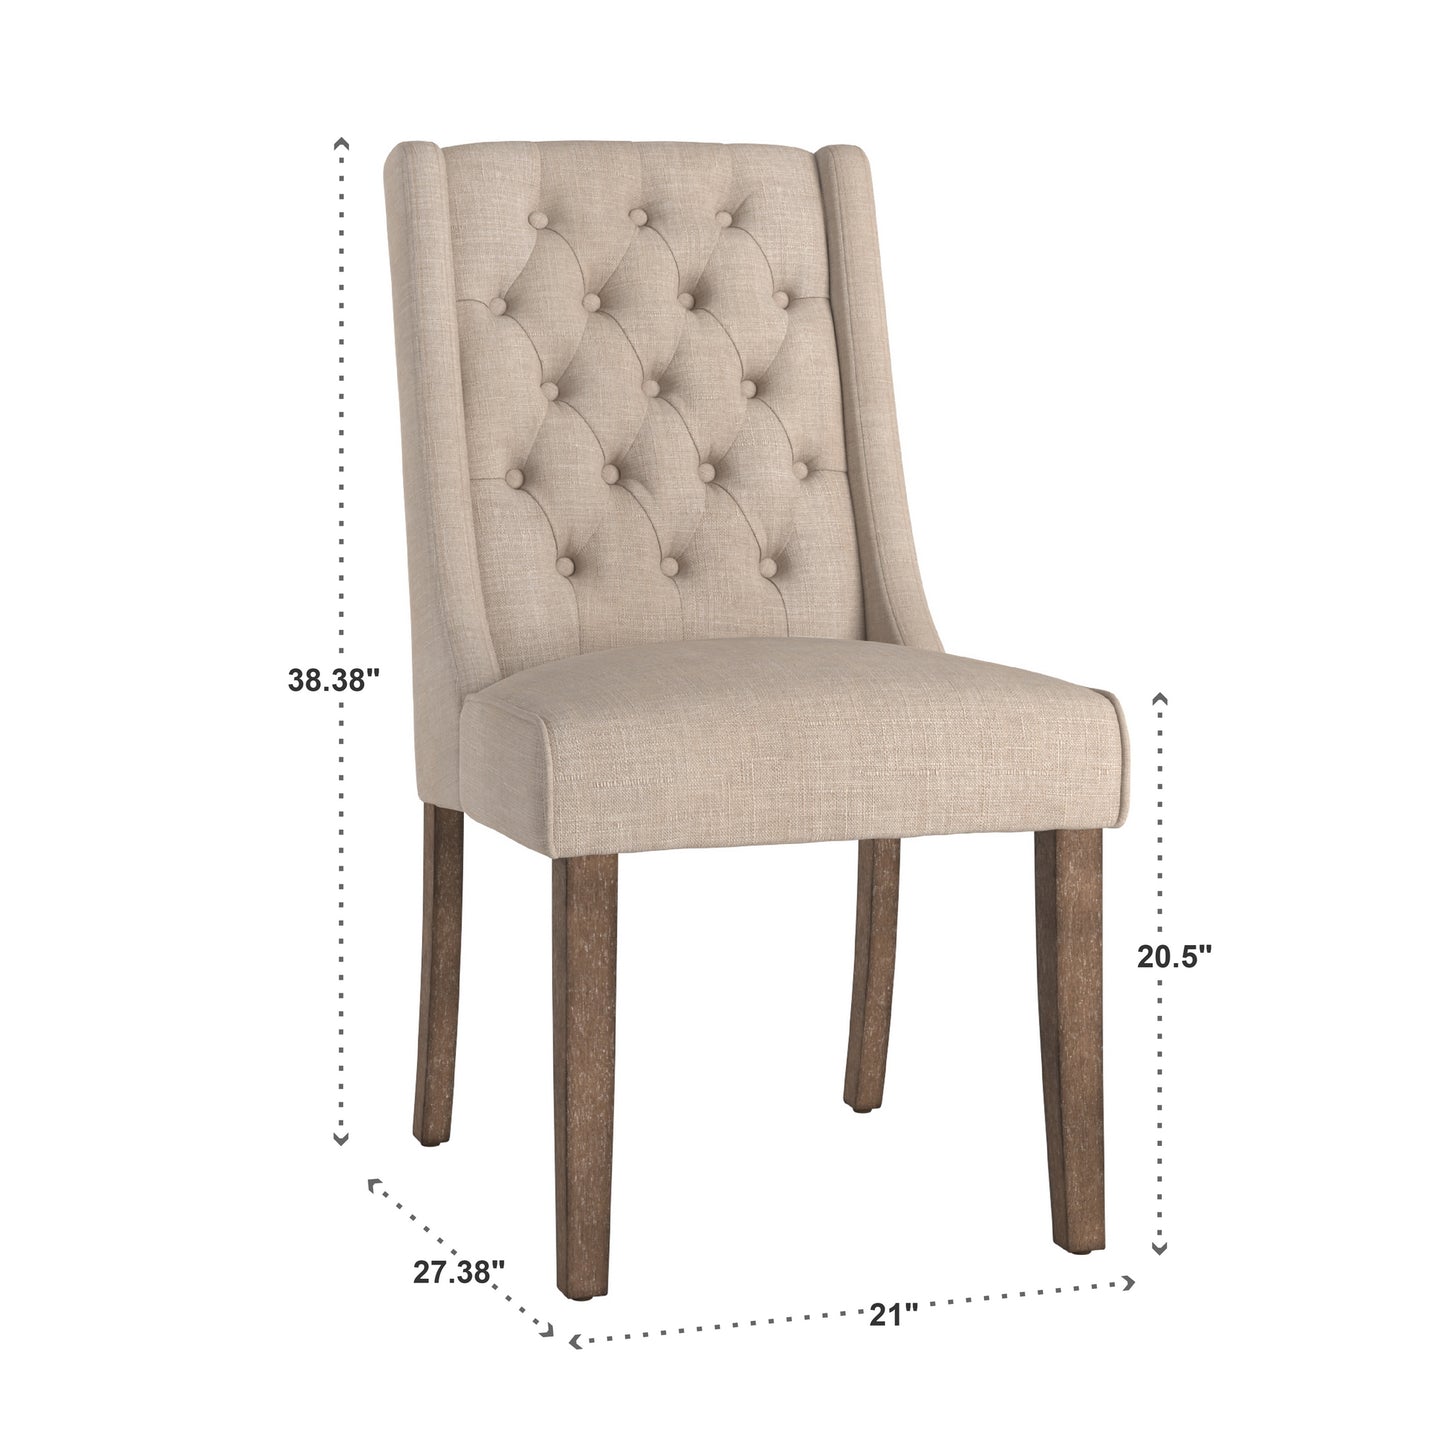 Tufted Wingback Hostess Chairs (Set of 2) - Beige Linen